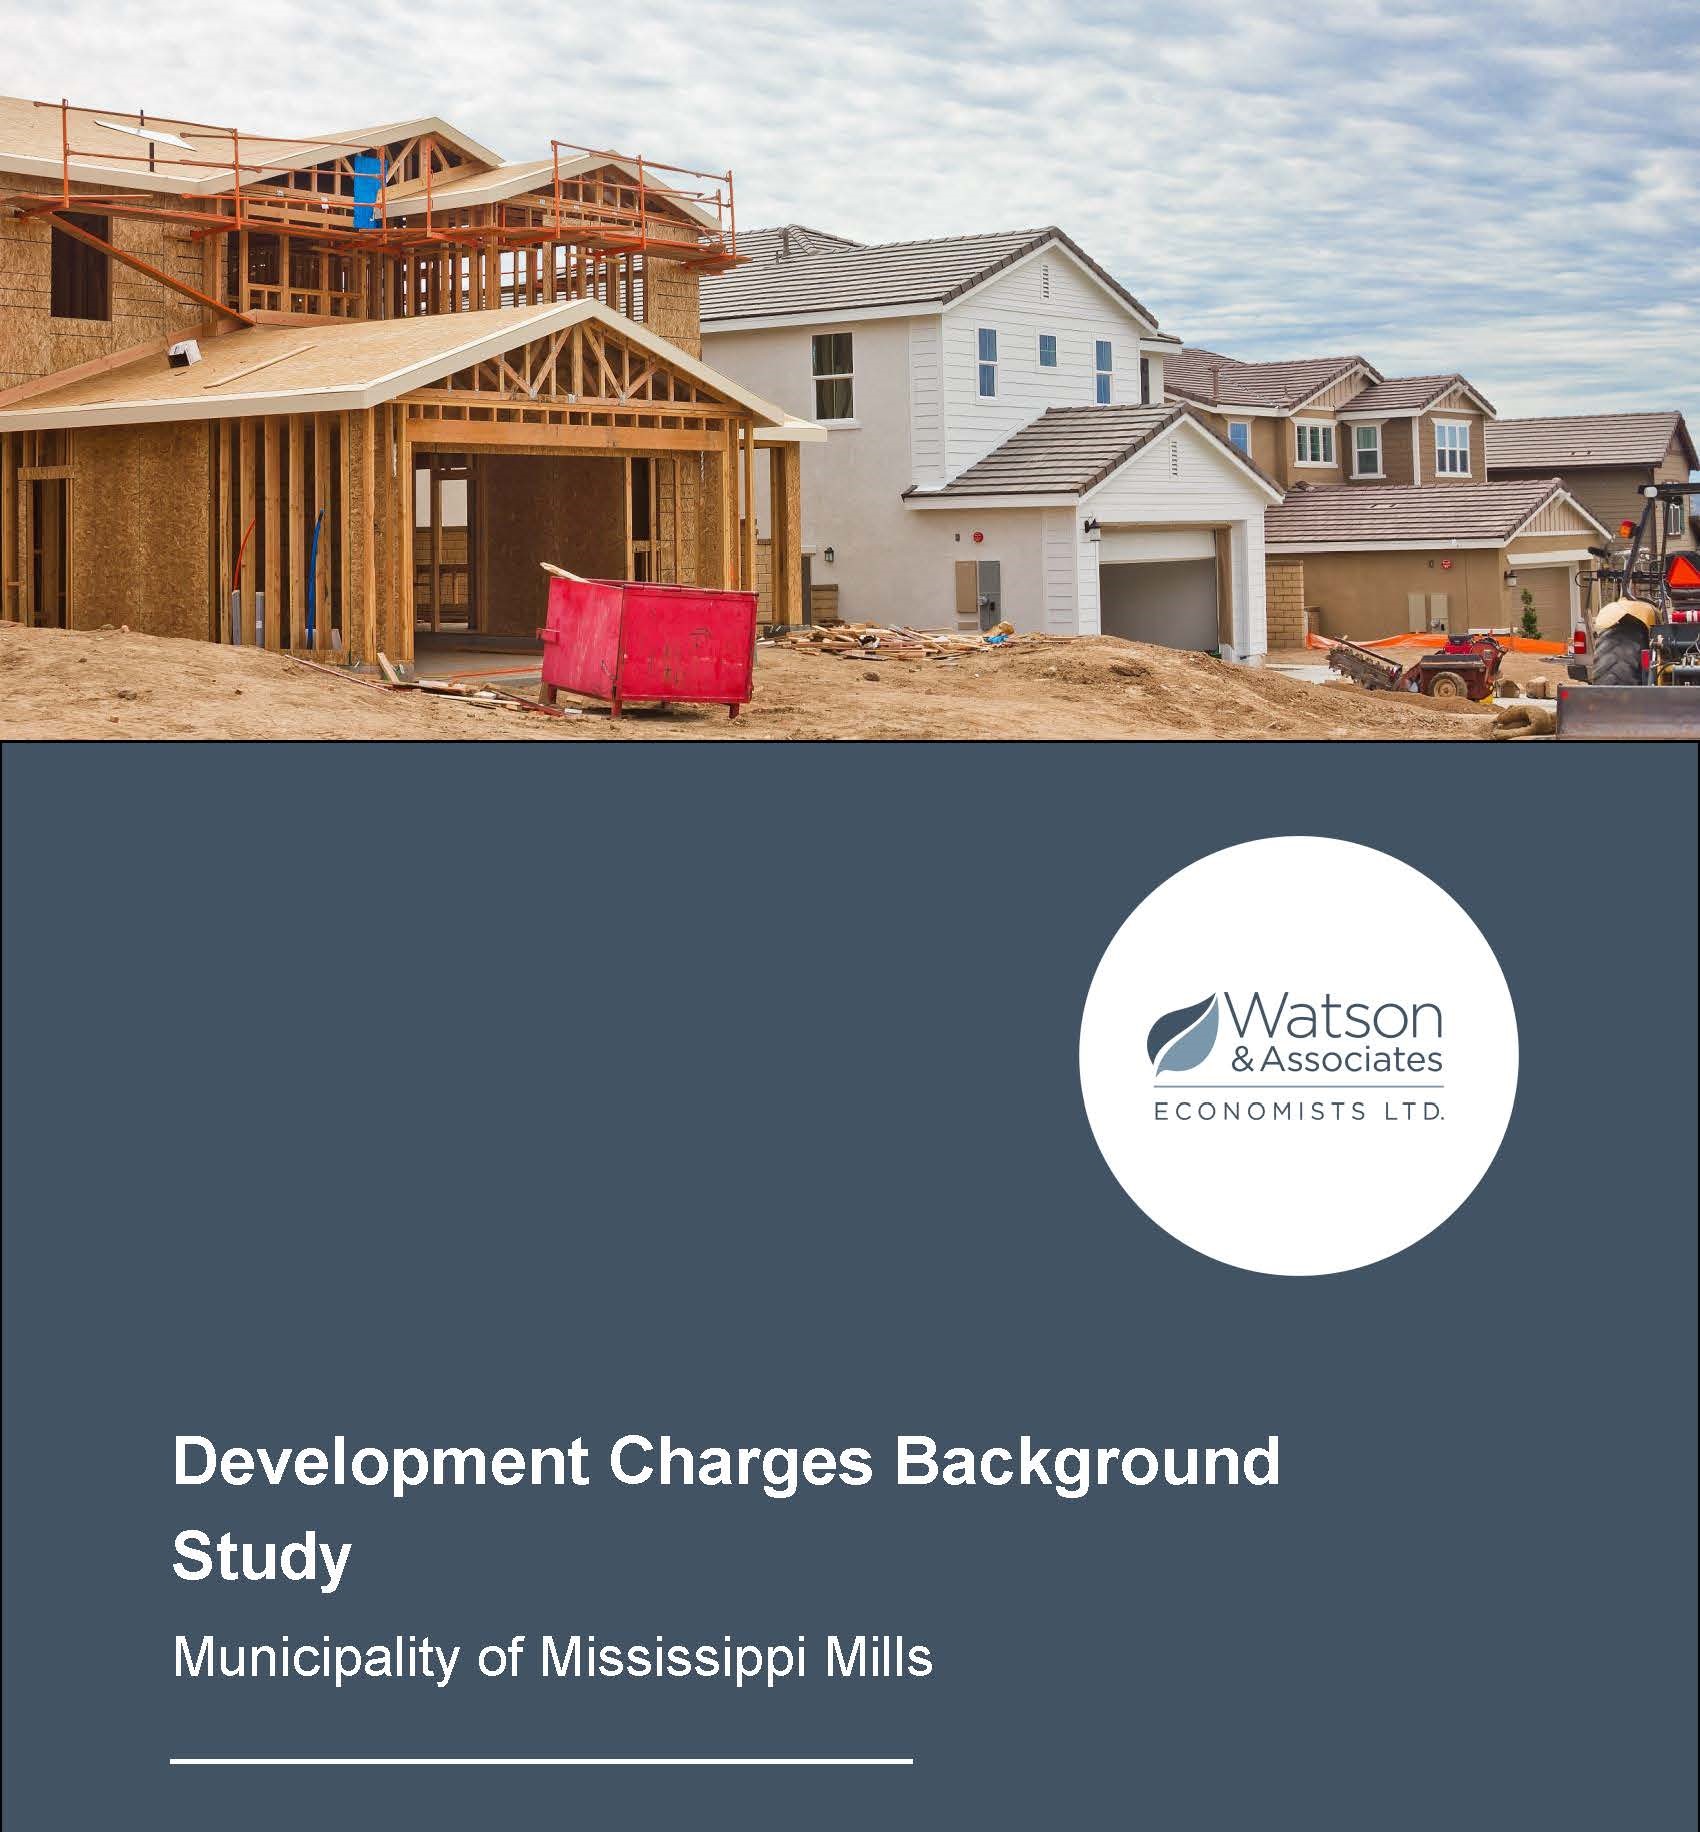 Cover of Development Charges Background Study showing photo of home construction